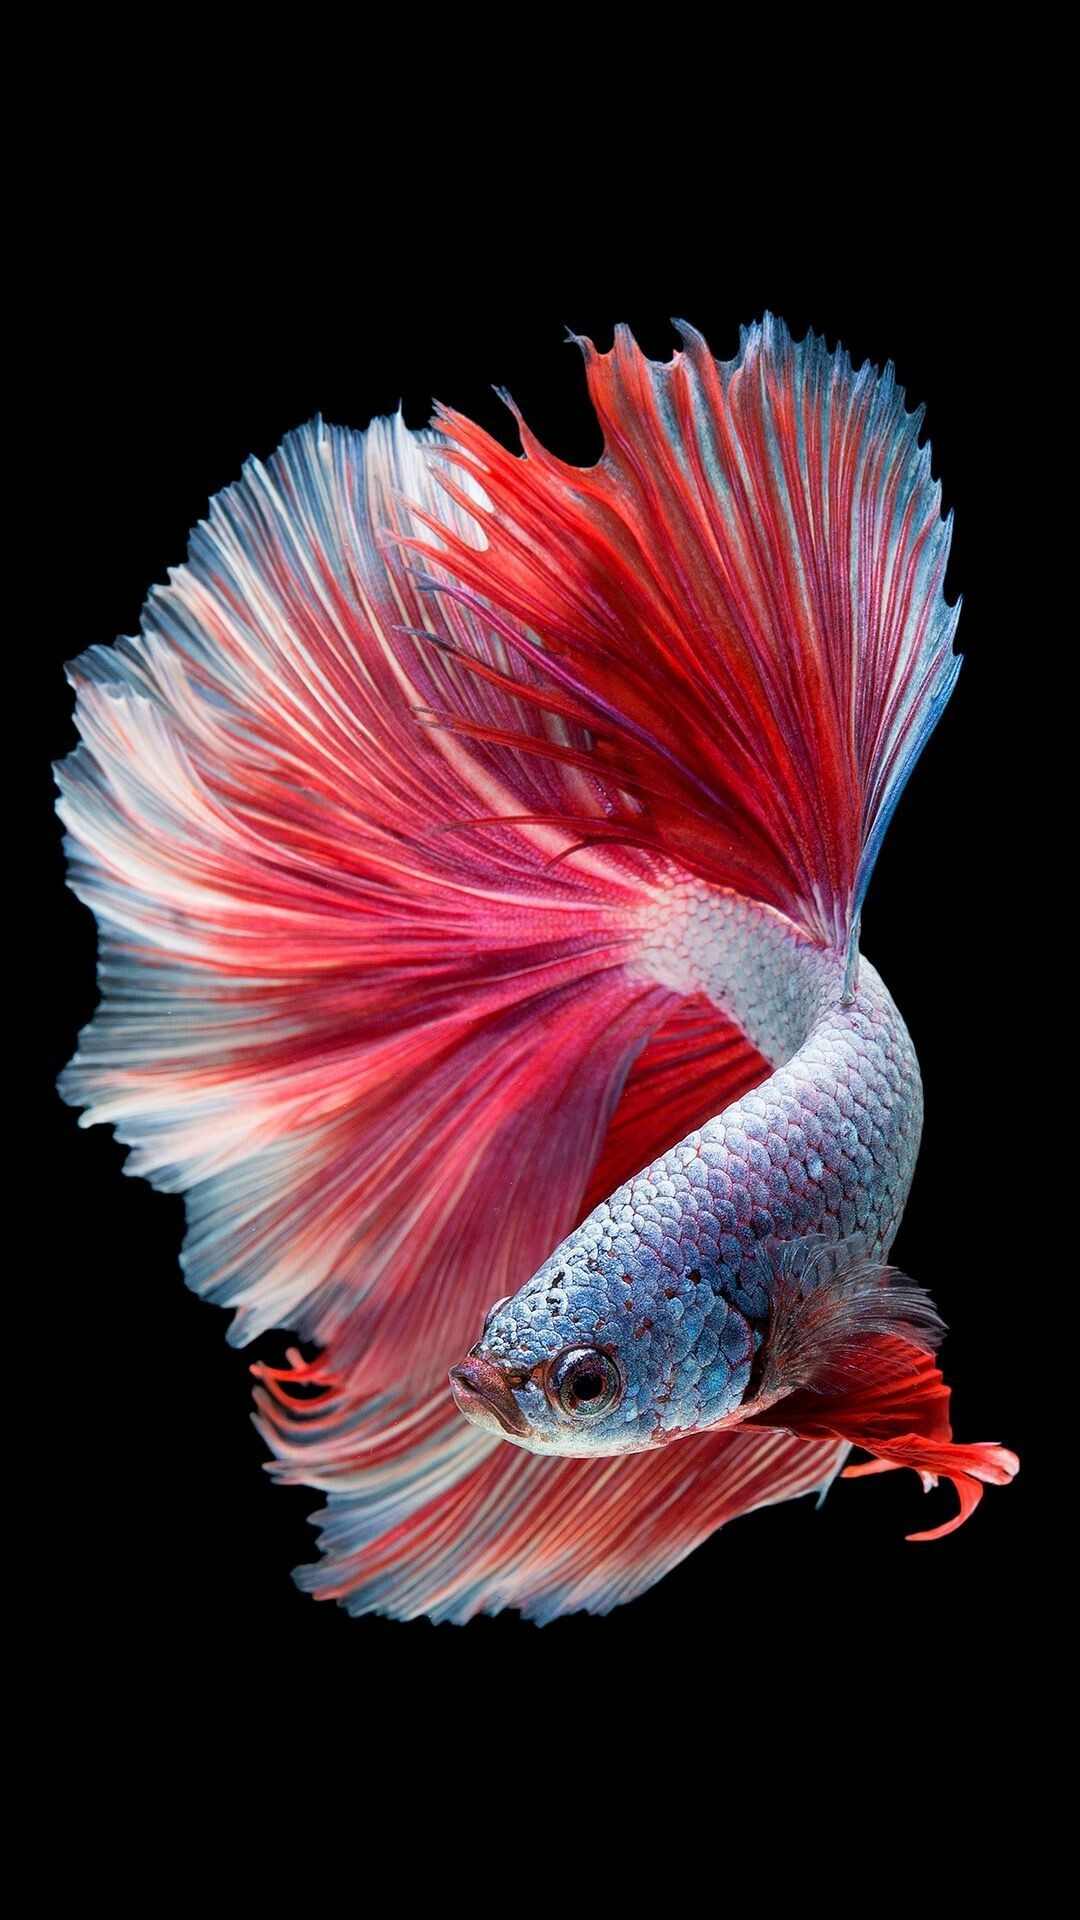 Fish: Betta splendens, Known for their stunning colors, decorative fins, and tendency to fight. 1080x1920 Full HD Background.